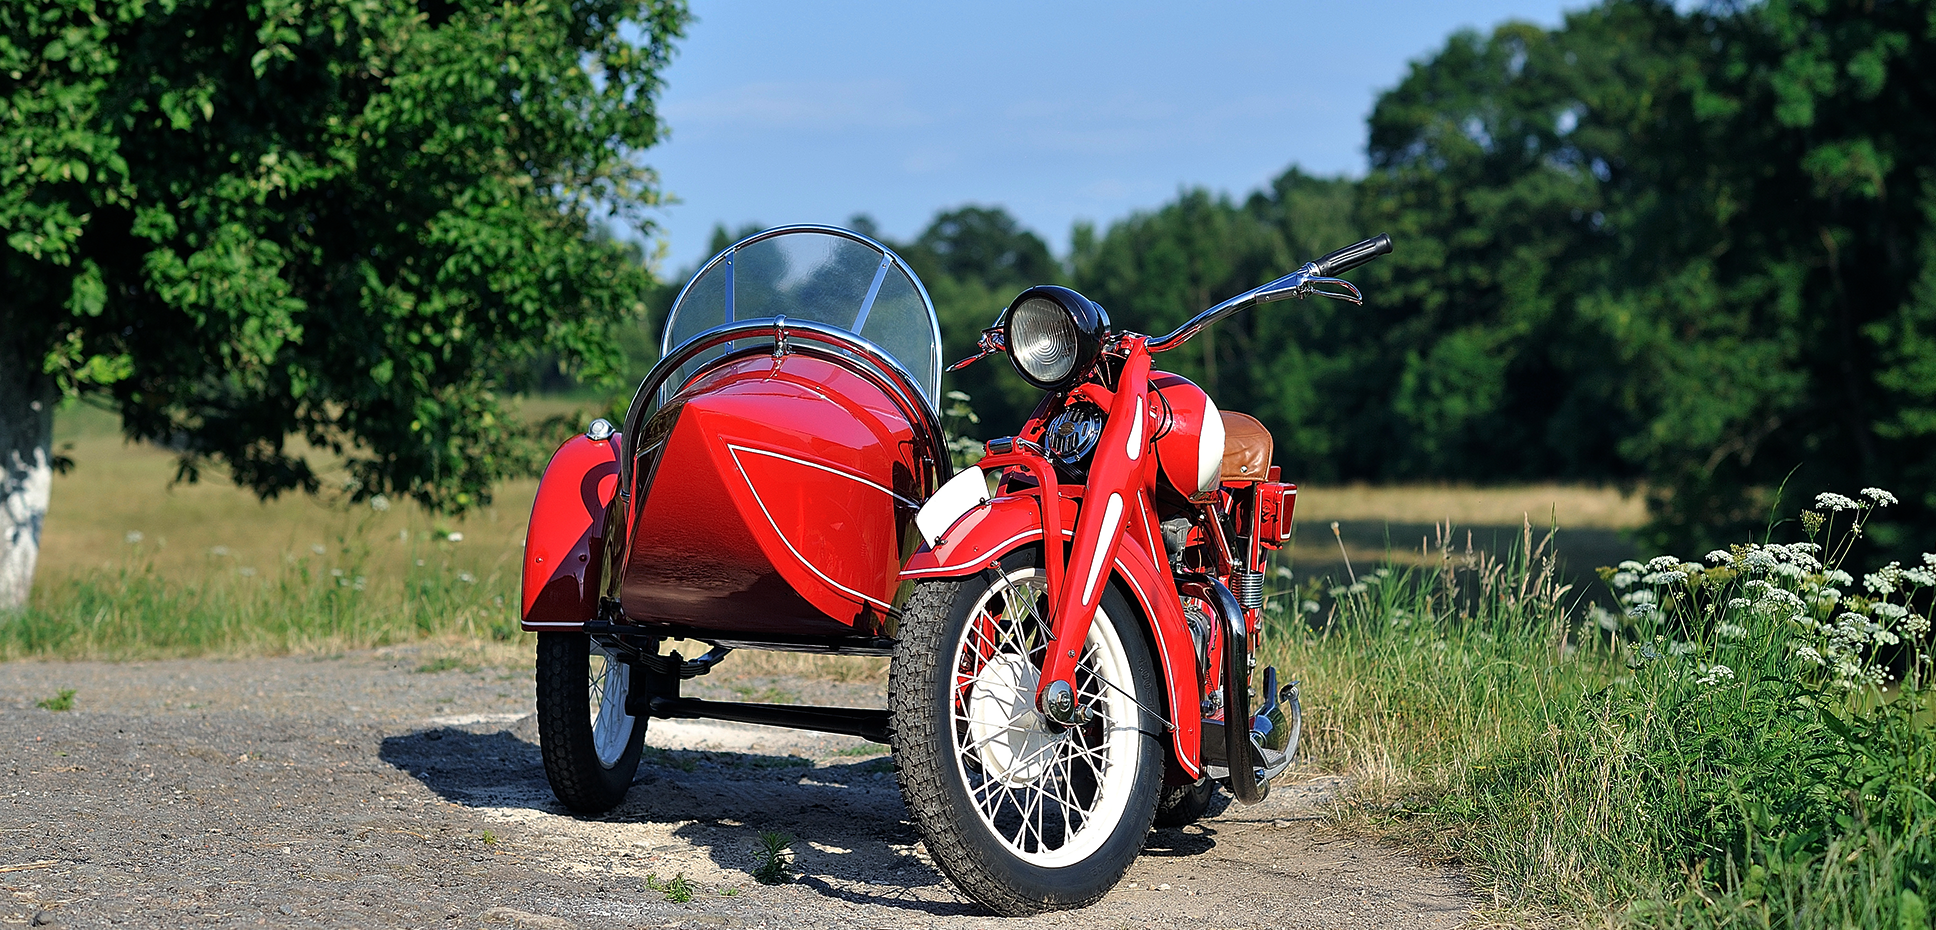 A bright red motorcycle sits parked next to a sidecar